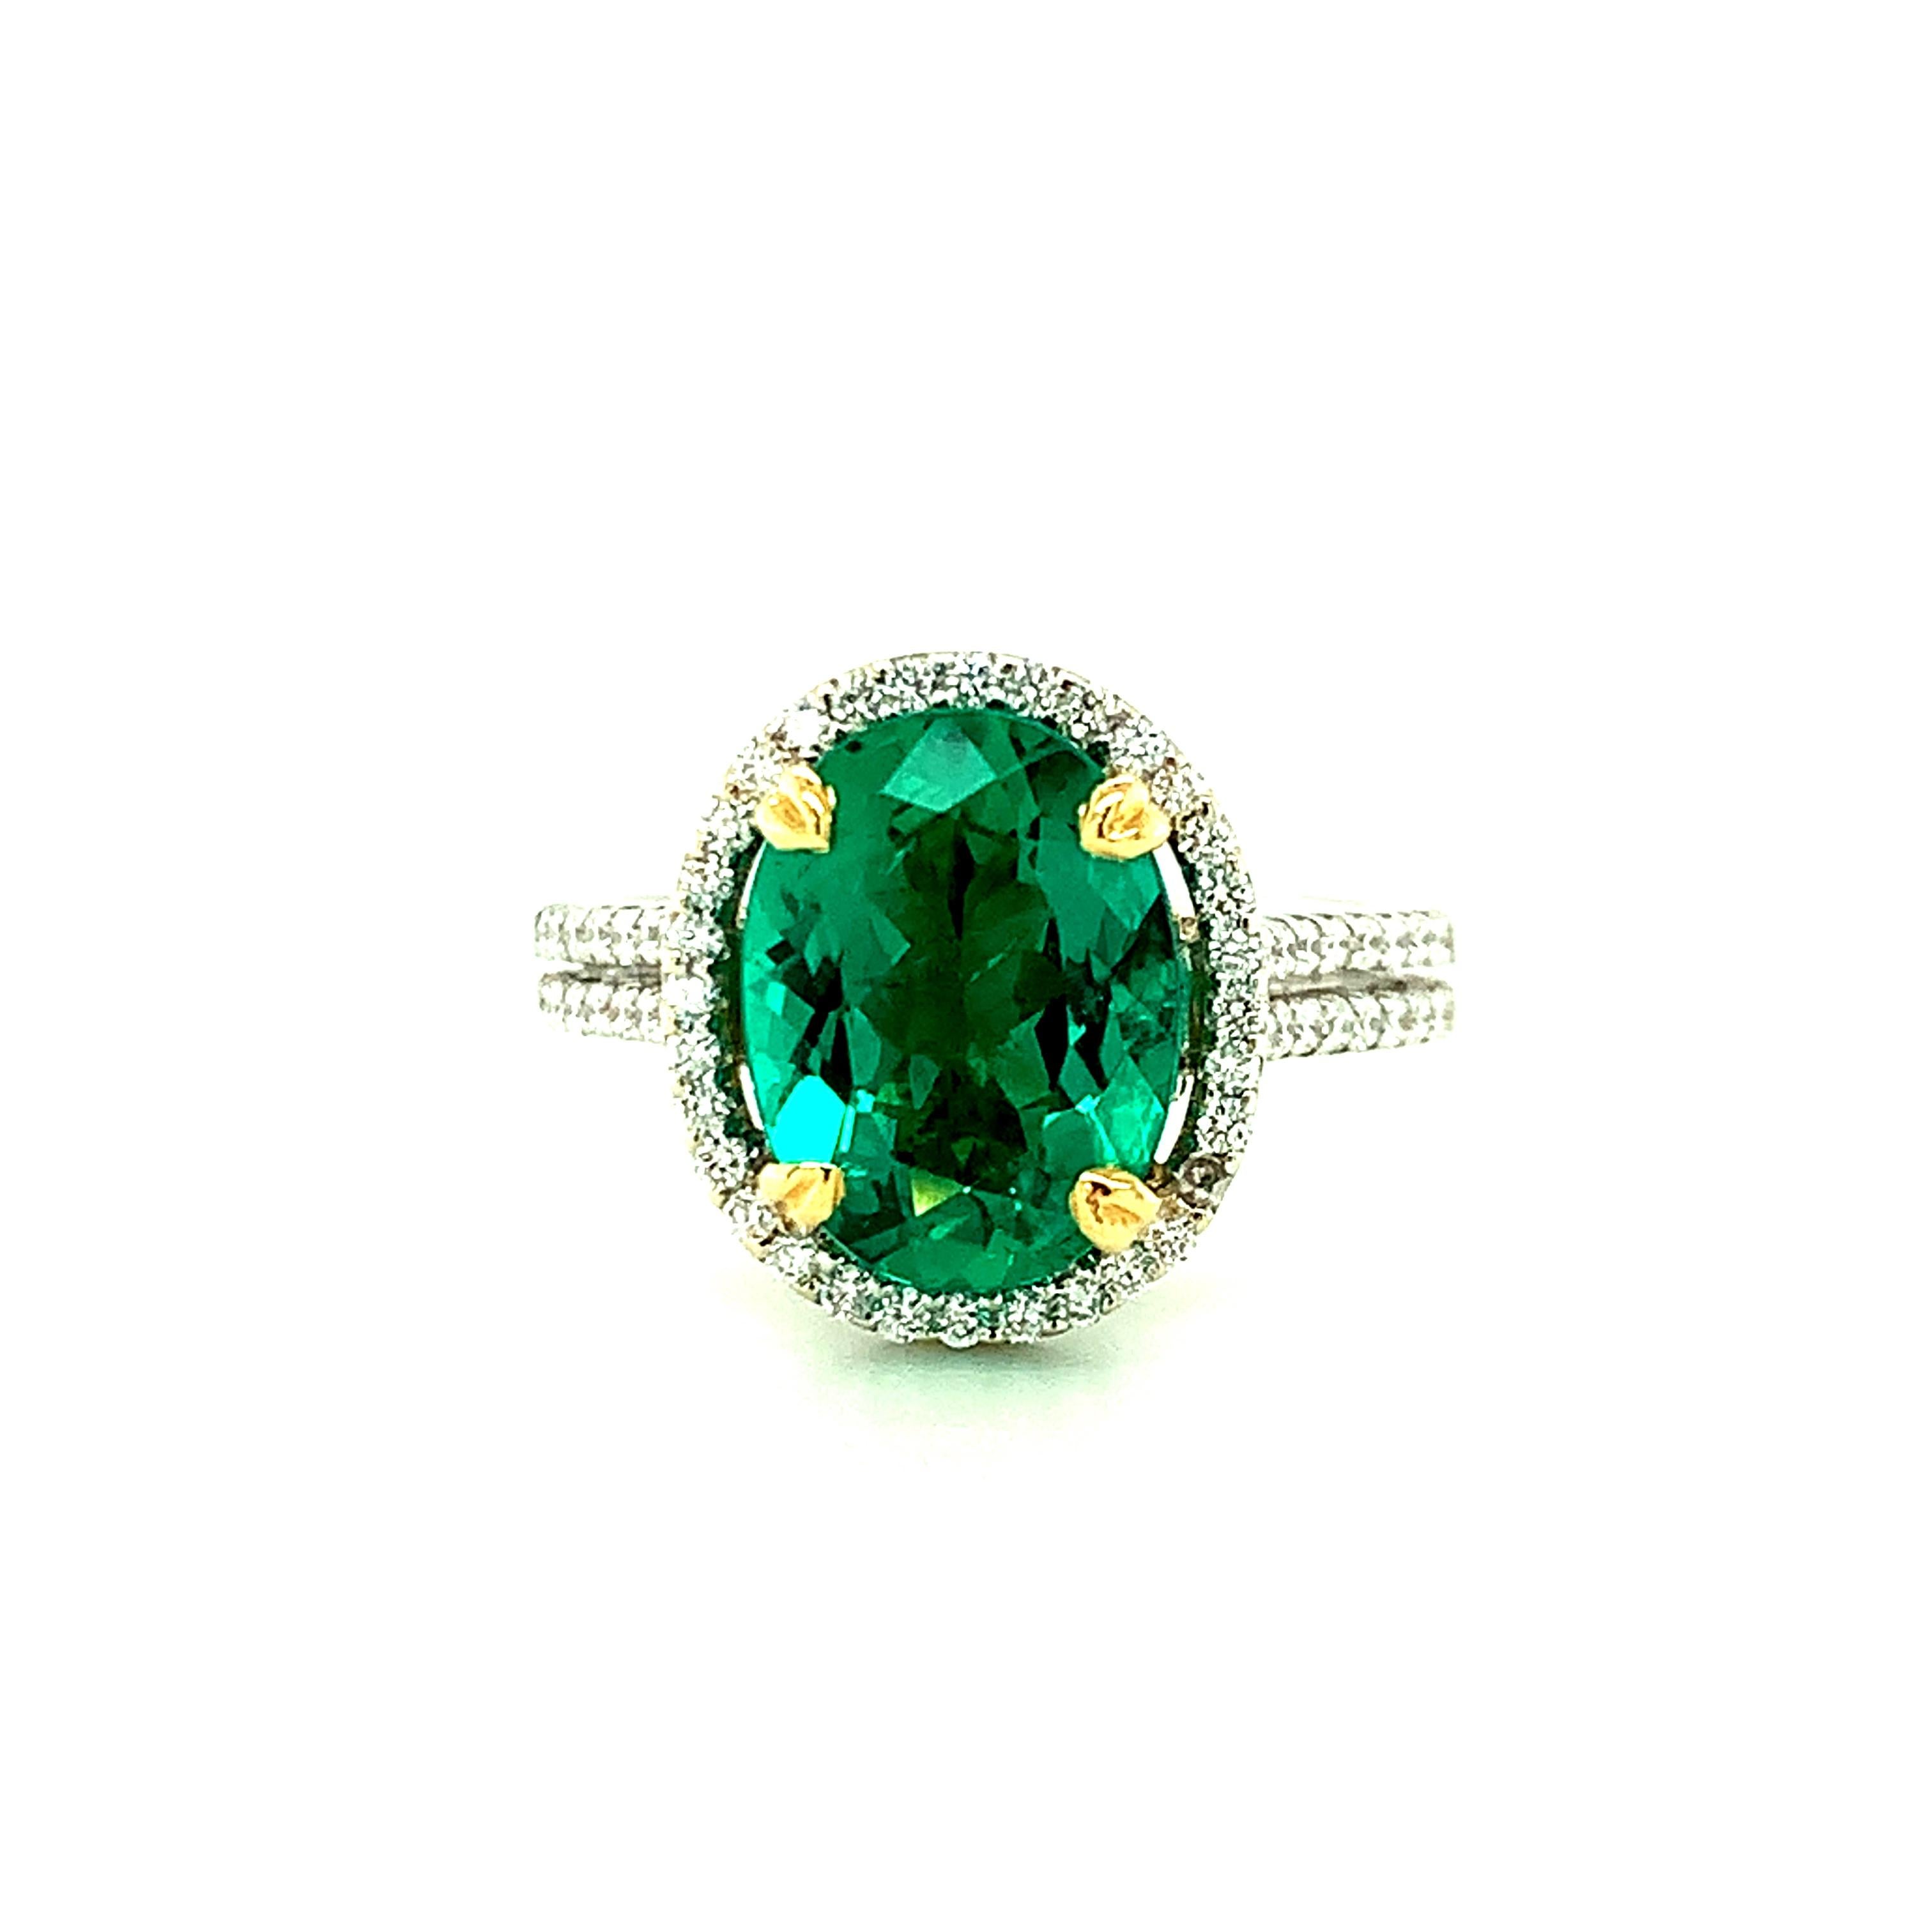 This exquisite cocktail ring features a 2.52 carat, extremely fine Brazilian emerald oval with superior clarity! With exceptionally rich, vibrant green color and a hint of elegant blue, this is a real gem! The emerald has been faceted as an oval,